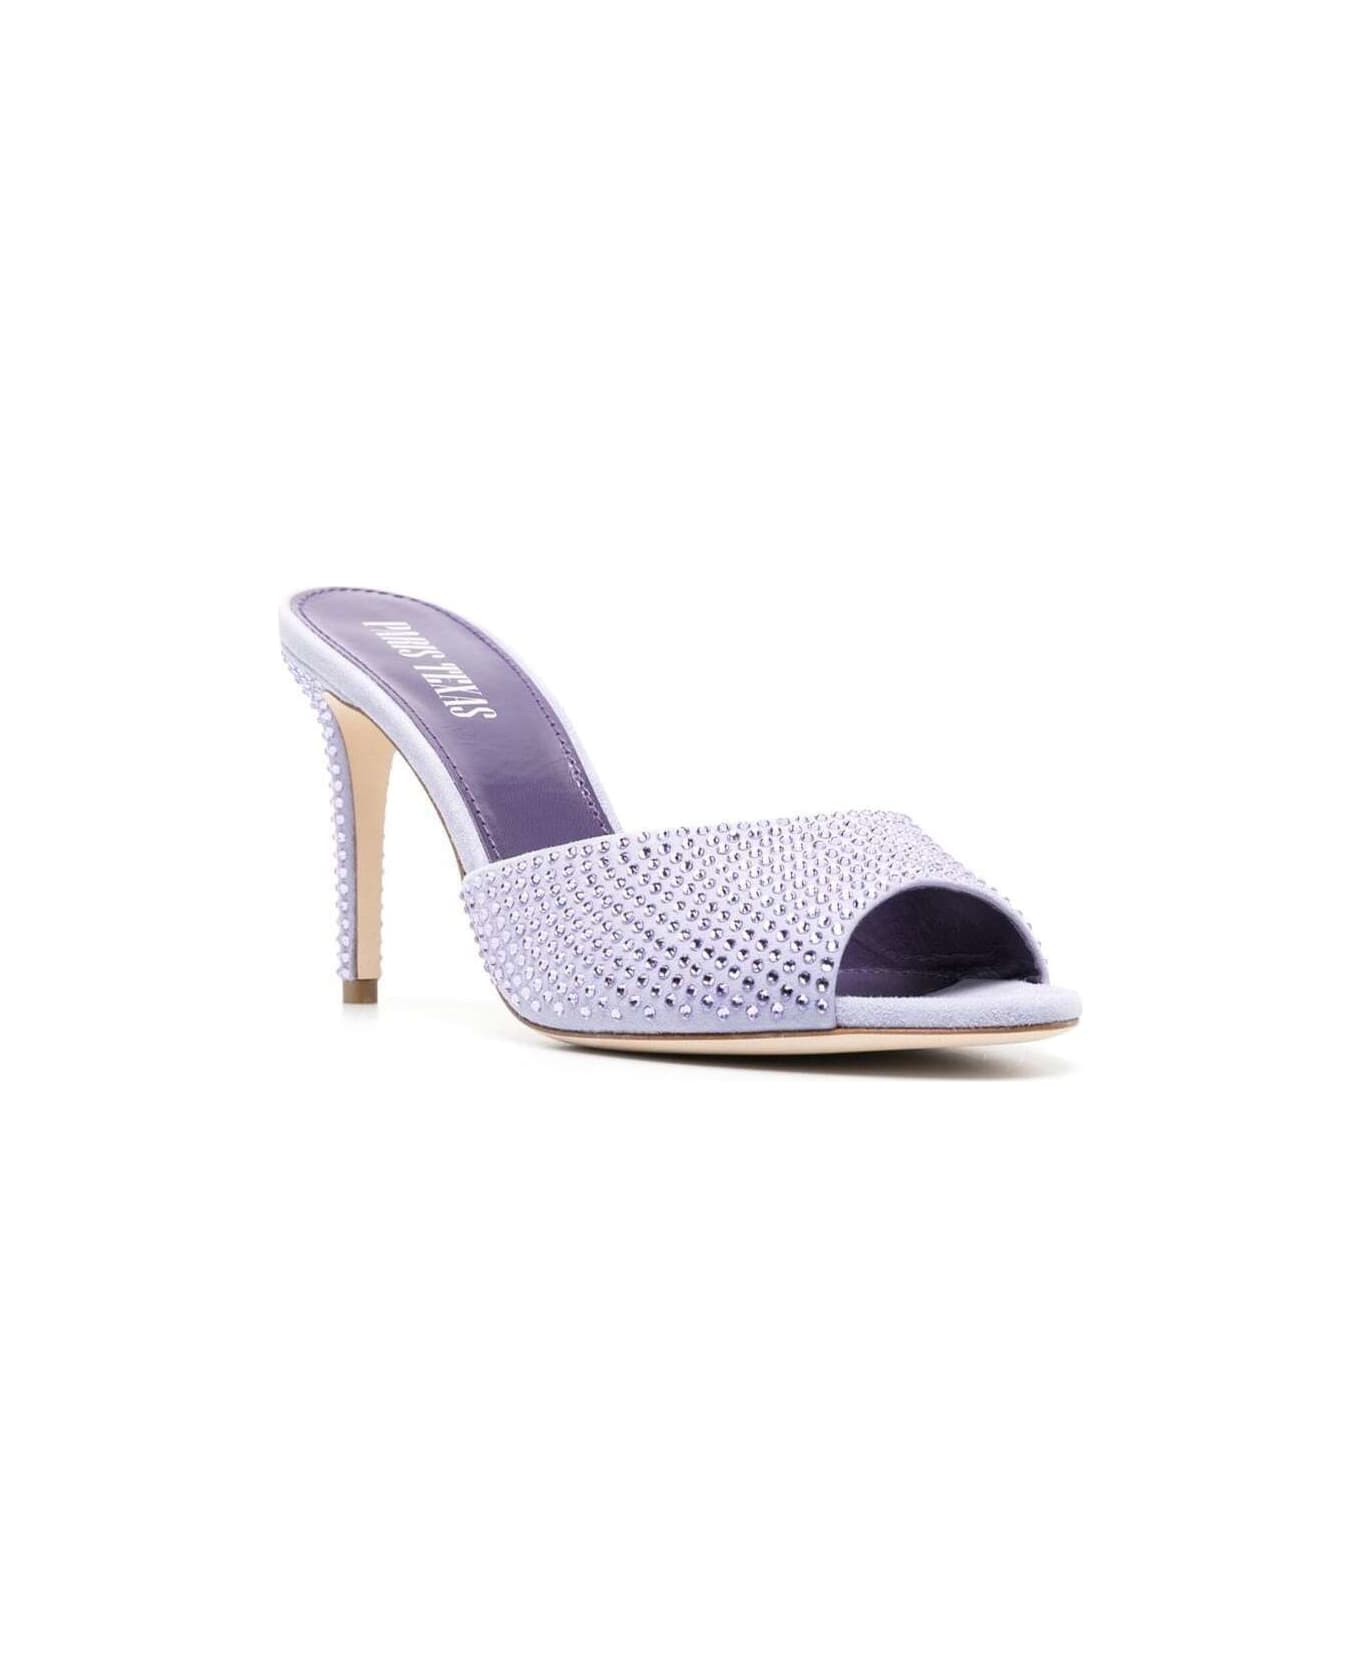 Paris Texas 'holly' Lilac Mules With Tonal Rhinestone Embellishment In Leather Woman - Violet